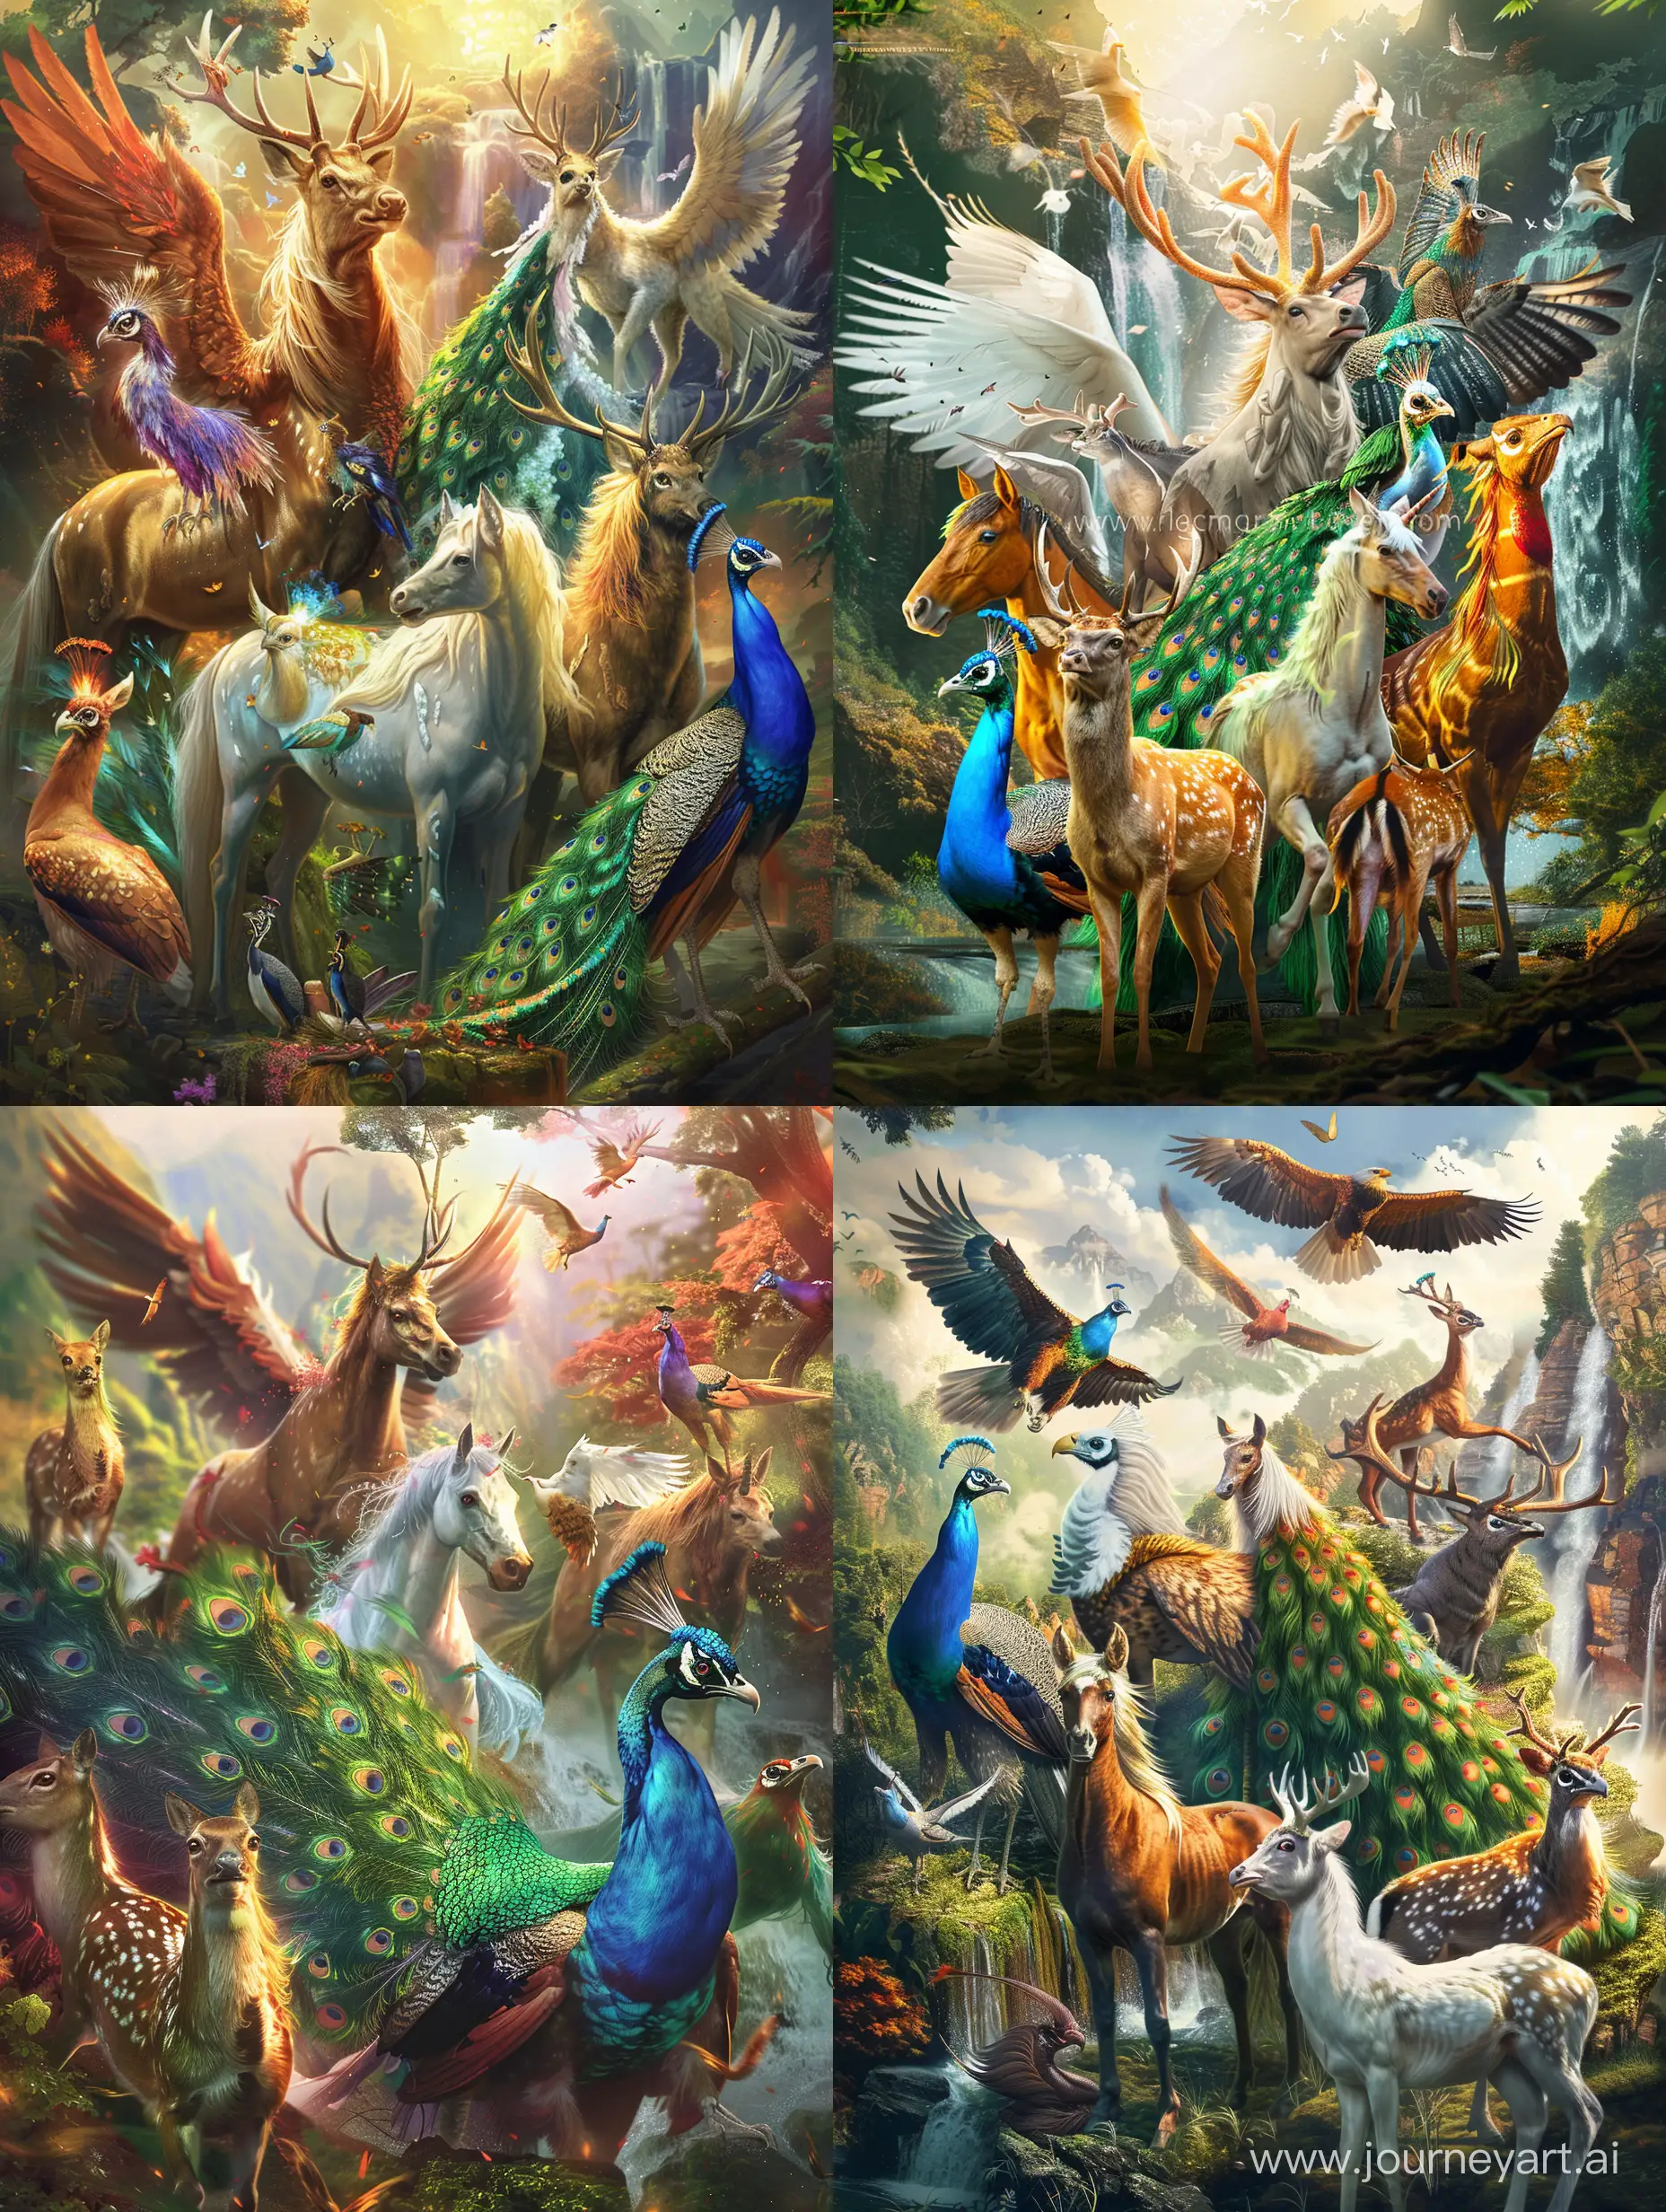 Create a mesmerizing, high-resolution image of the most beautiful and fantastic hybrid animals imaginable. Imagine combinations of various majestic creatures, like the grace of a horse with the wings of an eagle, or the elegance of a deer with the colorful plumage of a peacock. Each hybrid animal should be detailed with realistic textures and colors, showcasing their unique and surreal beauty. The setting should be a breathtaking natural landscape that complements the magic of these creatures, with vibrant colors and a touch of ethereal lighting to enhance the fantasy element. The image composition should be like a professional wildlife photograph, capturing the animals in dynamic, natural poses to convey a sense of realism within the fantastical. Focus on the sharpness of details, from the feathers to the fur, ensuring each creature stands out distinctly in this high-definition, artistic portrayal.